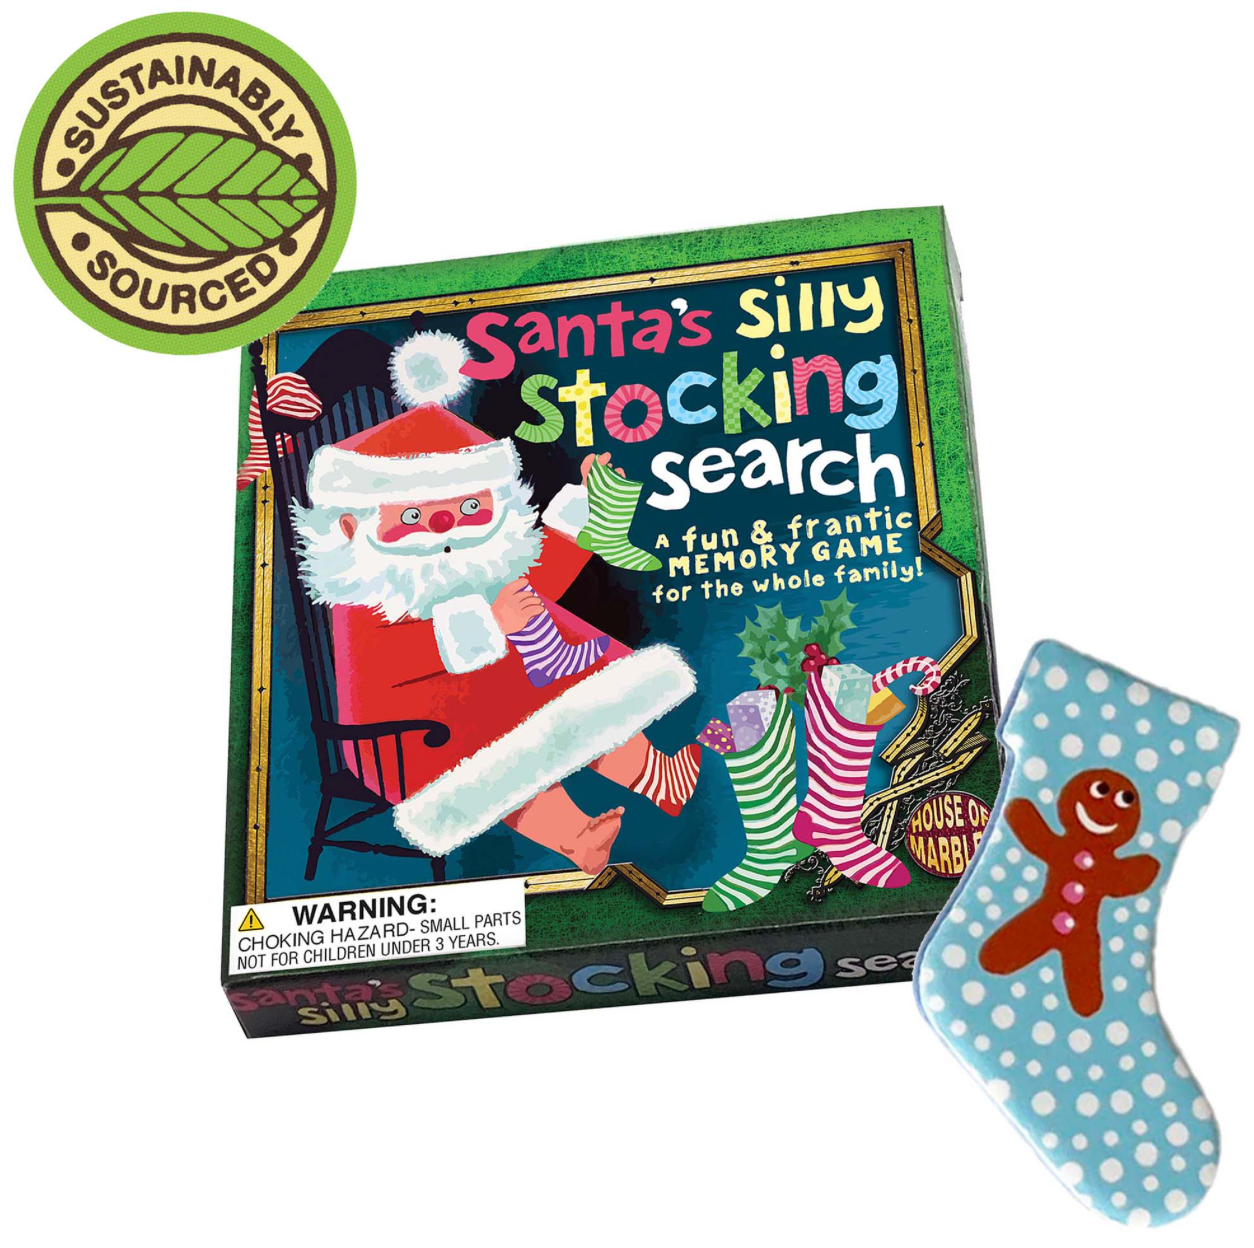 Santa's Silly Stocking Search Memory Match Game